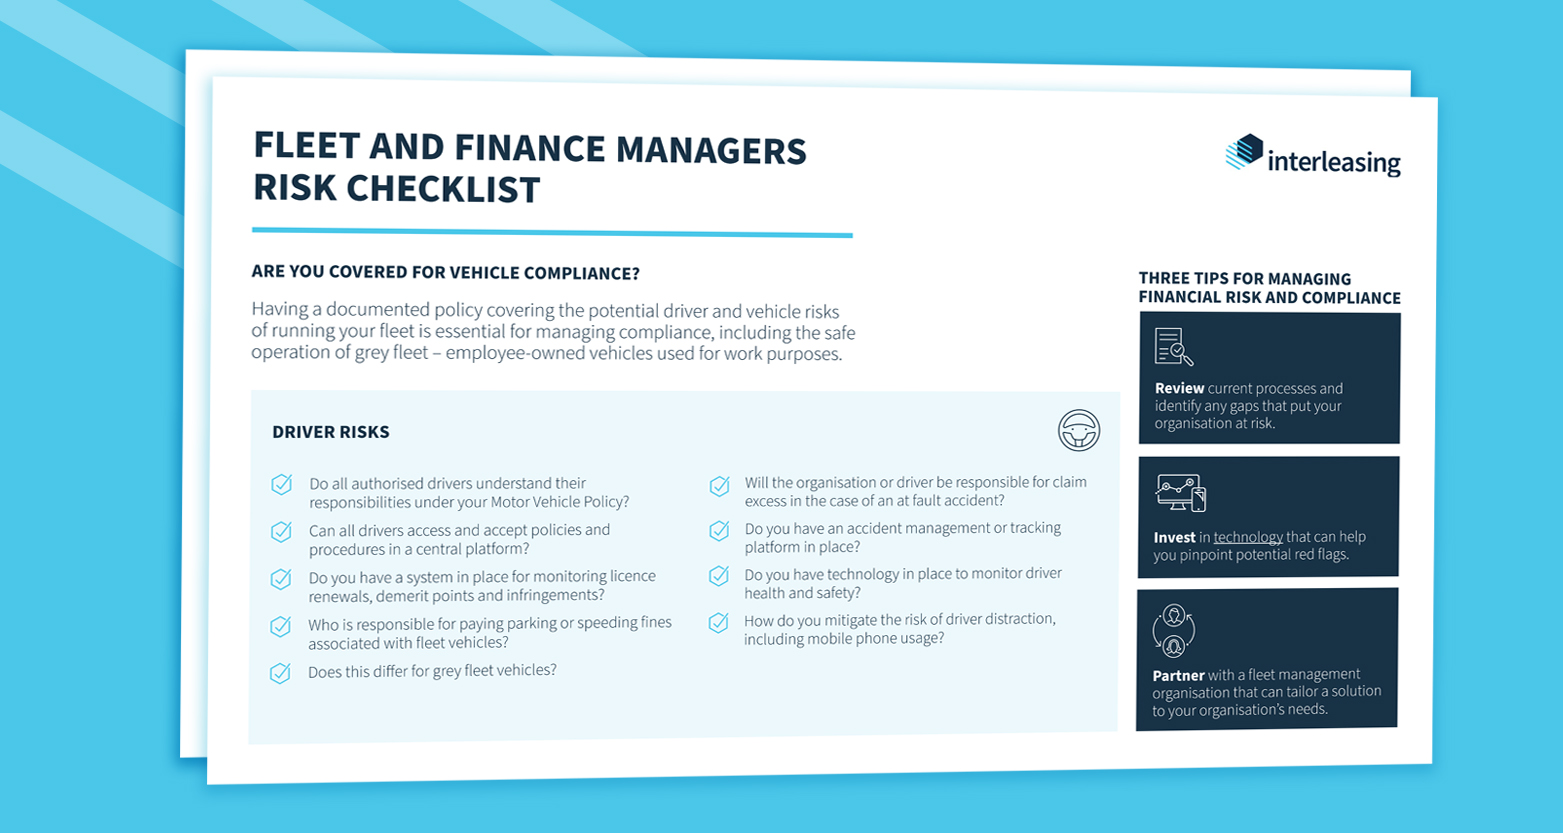 A risk checklist for fleet and finance managers 